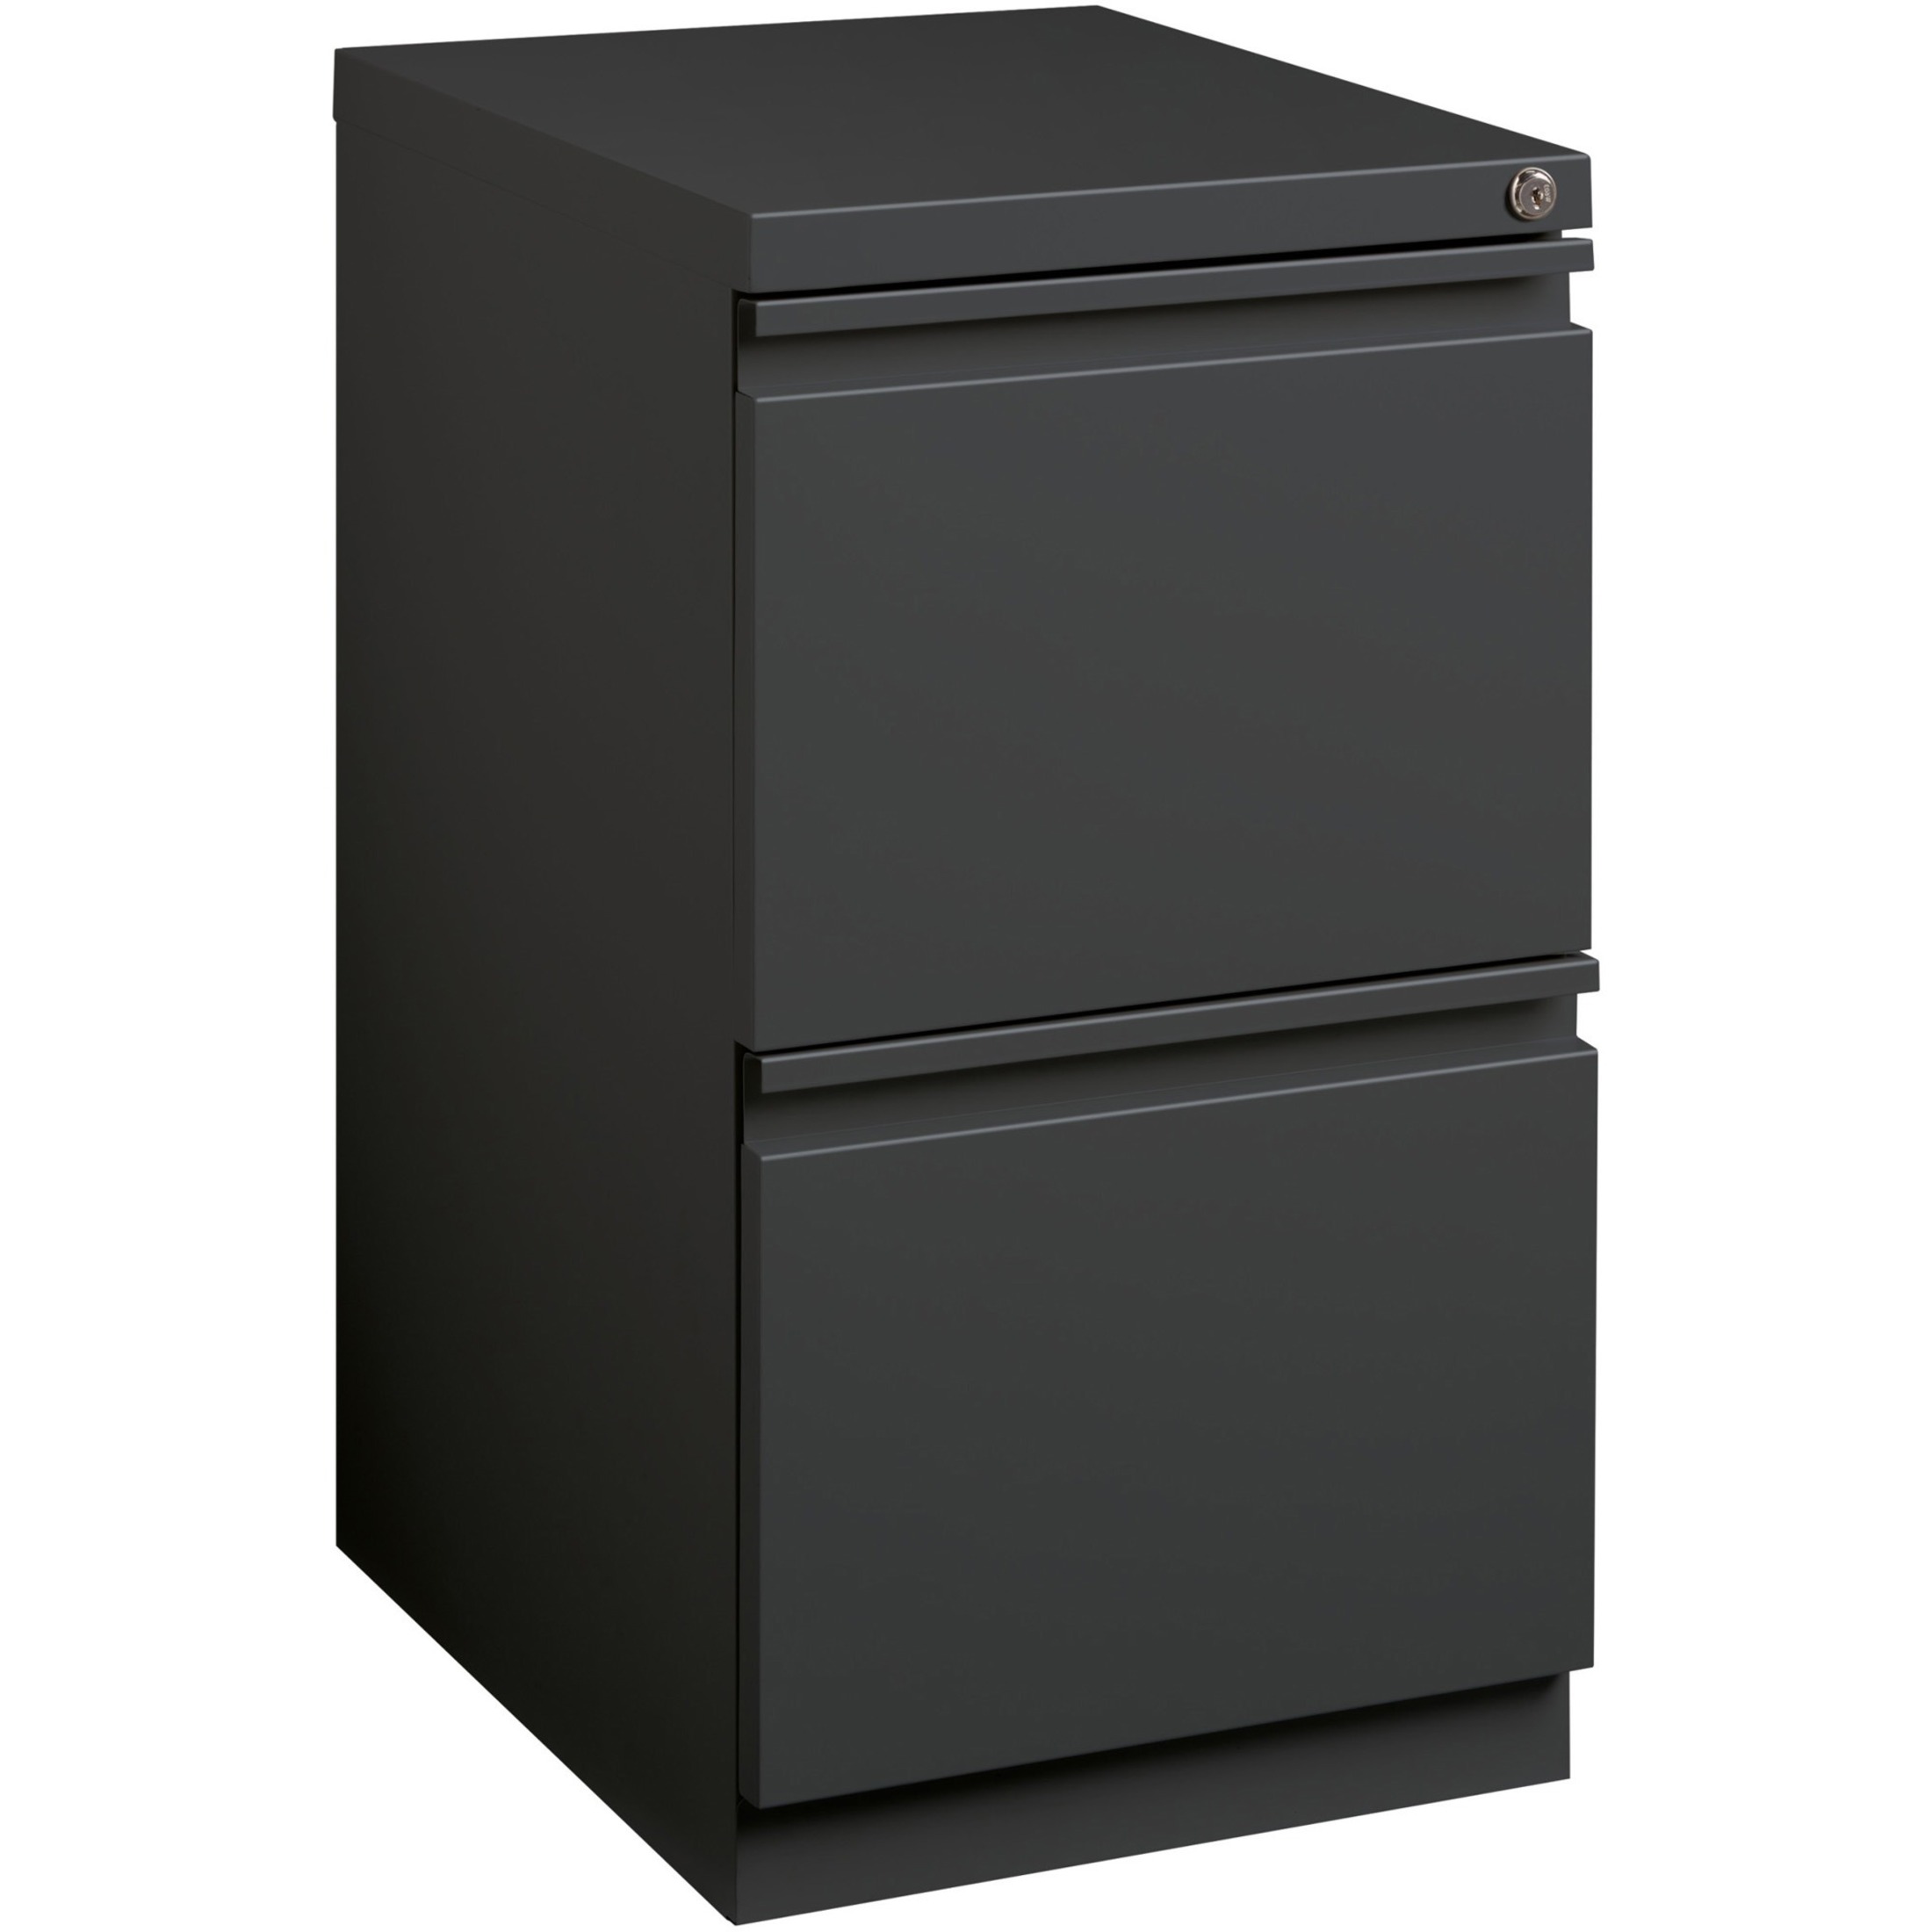 Lorell® 19-7/8"D Vertical 2-Drawer Mobile Pedestal File Cabinet, Charcoal - image 1 of 8